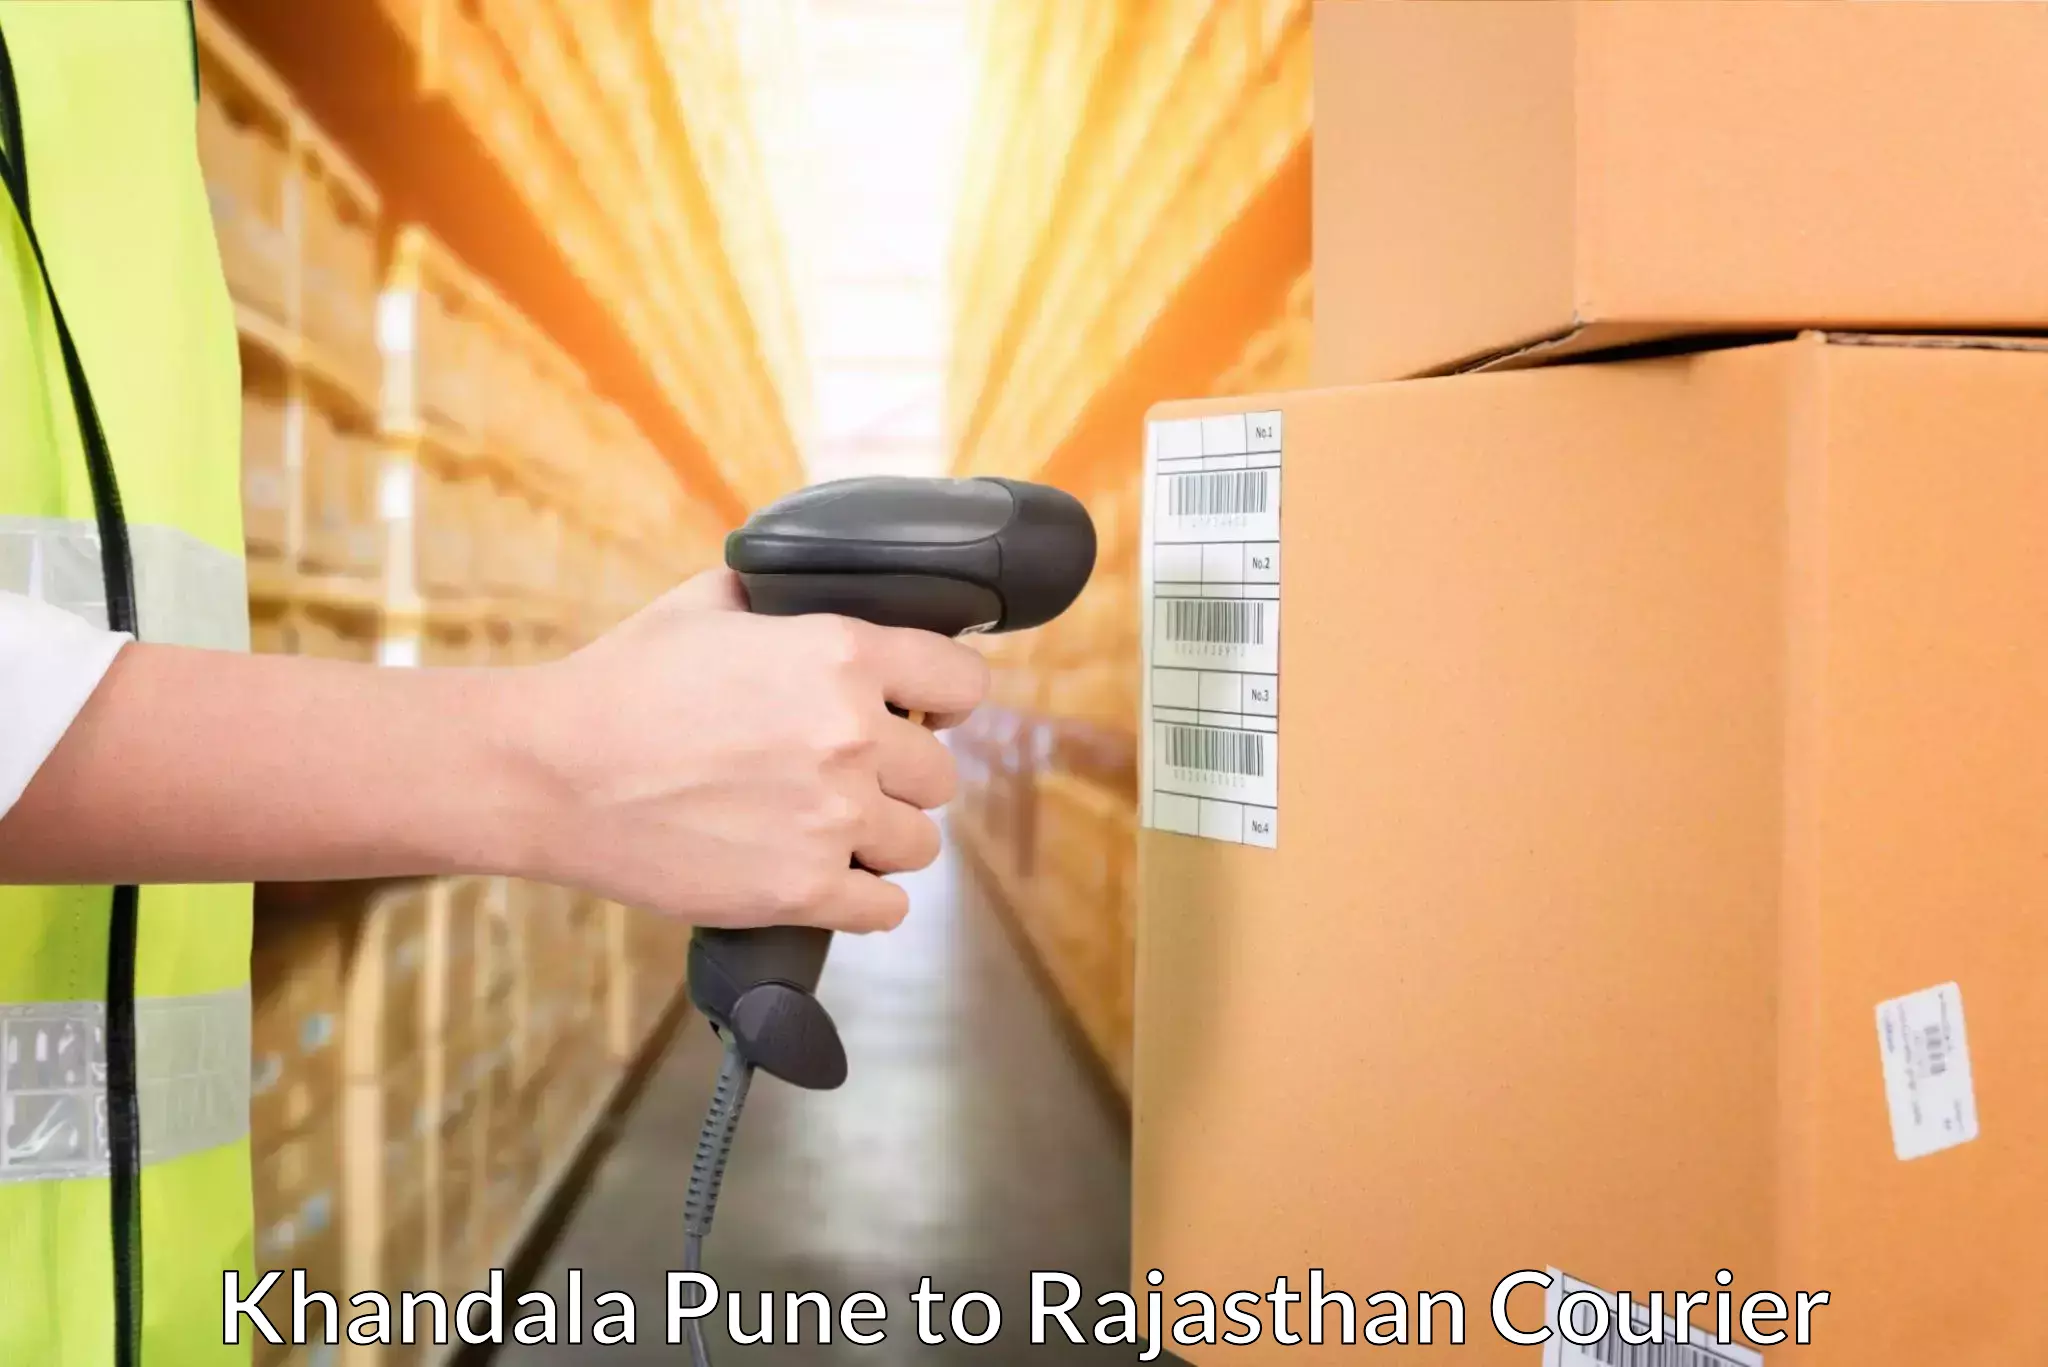 Residential courier service in Khandala Pune to Yeswanthapur